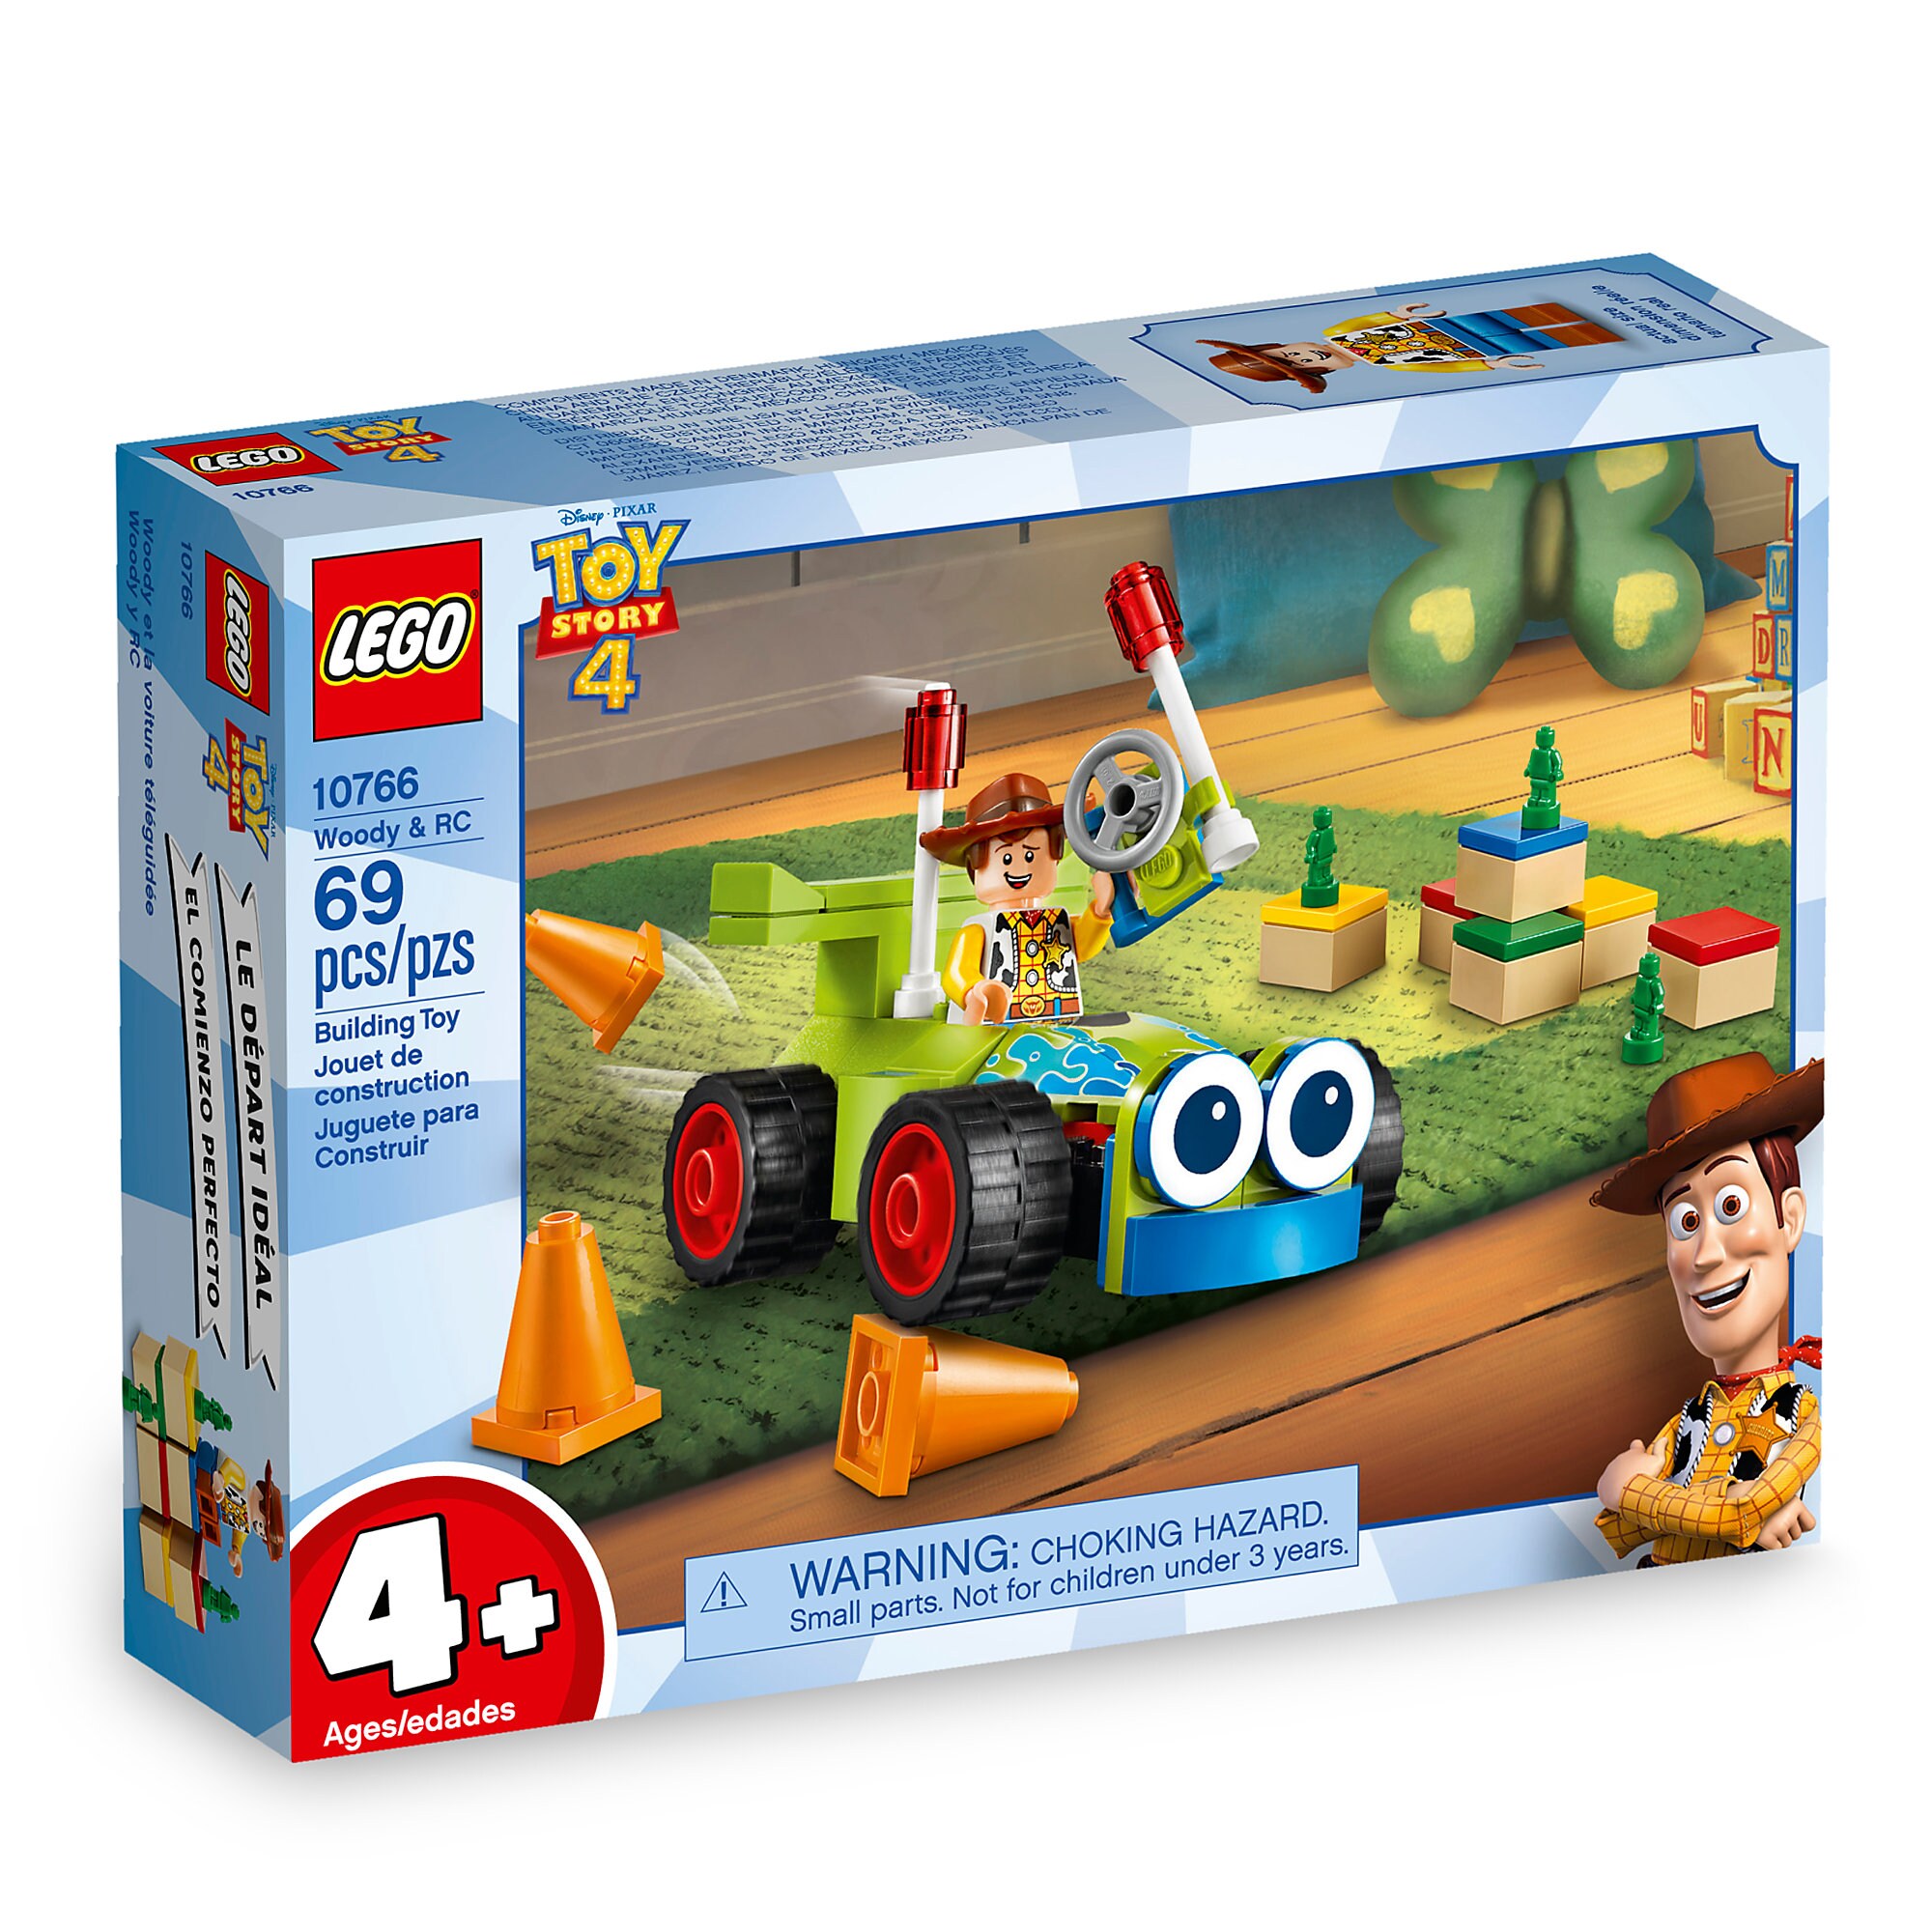 Woody & RC Play Set by LEGO - Toy Story 4